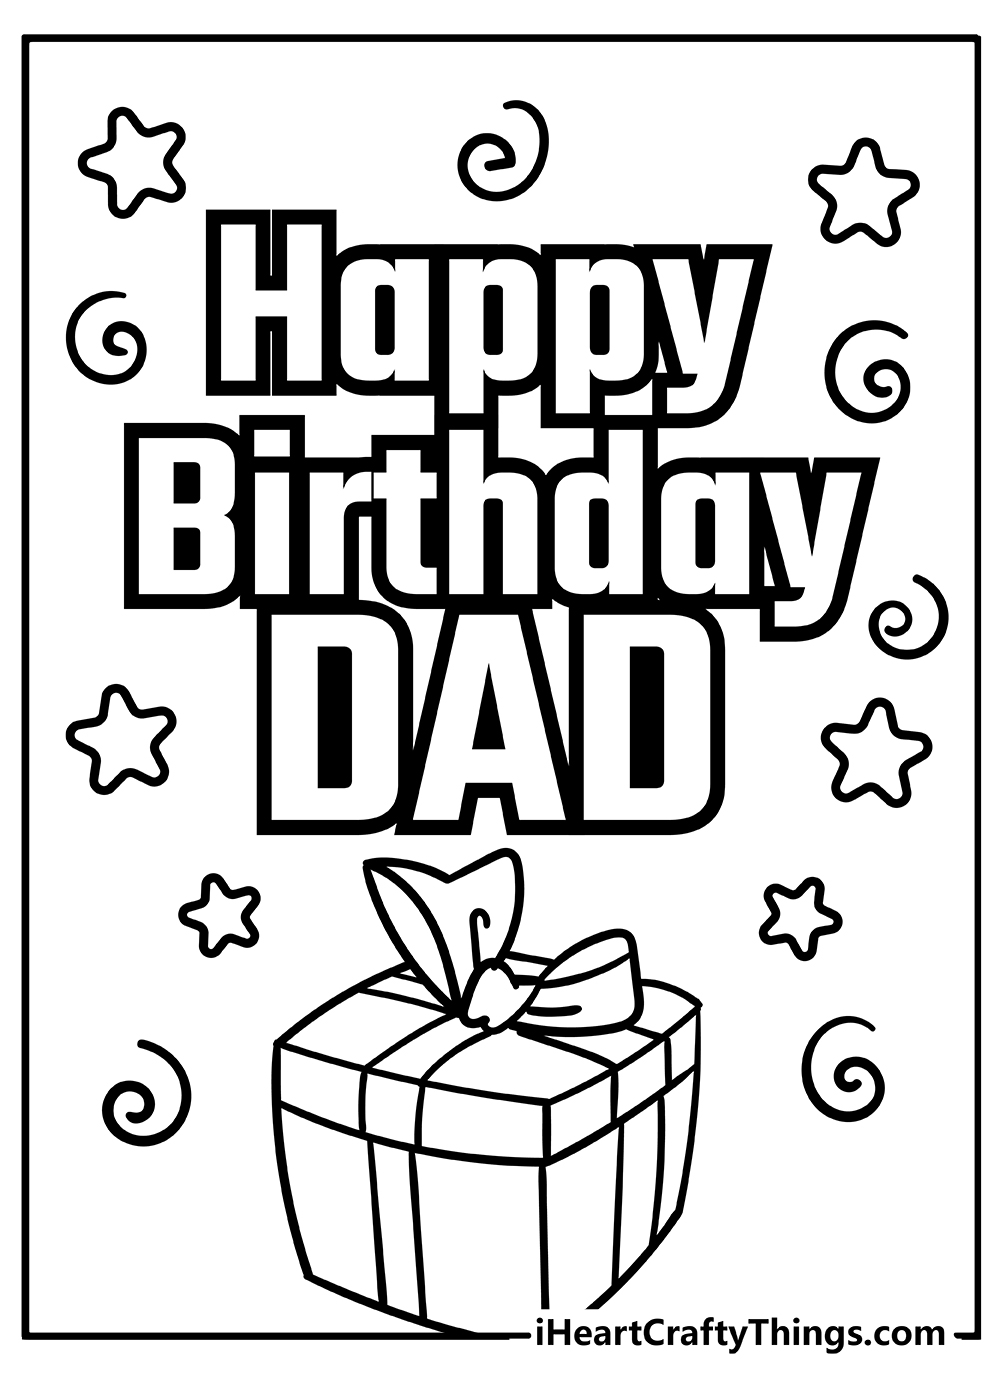 Happy Birthday Dad Coloring Book for adults free download